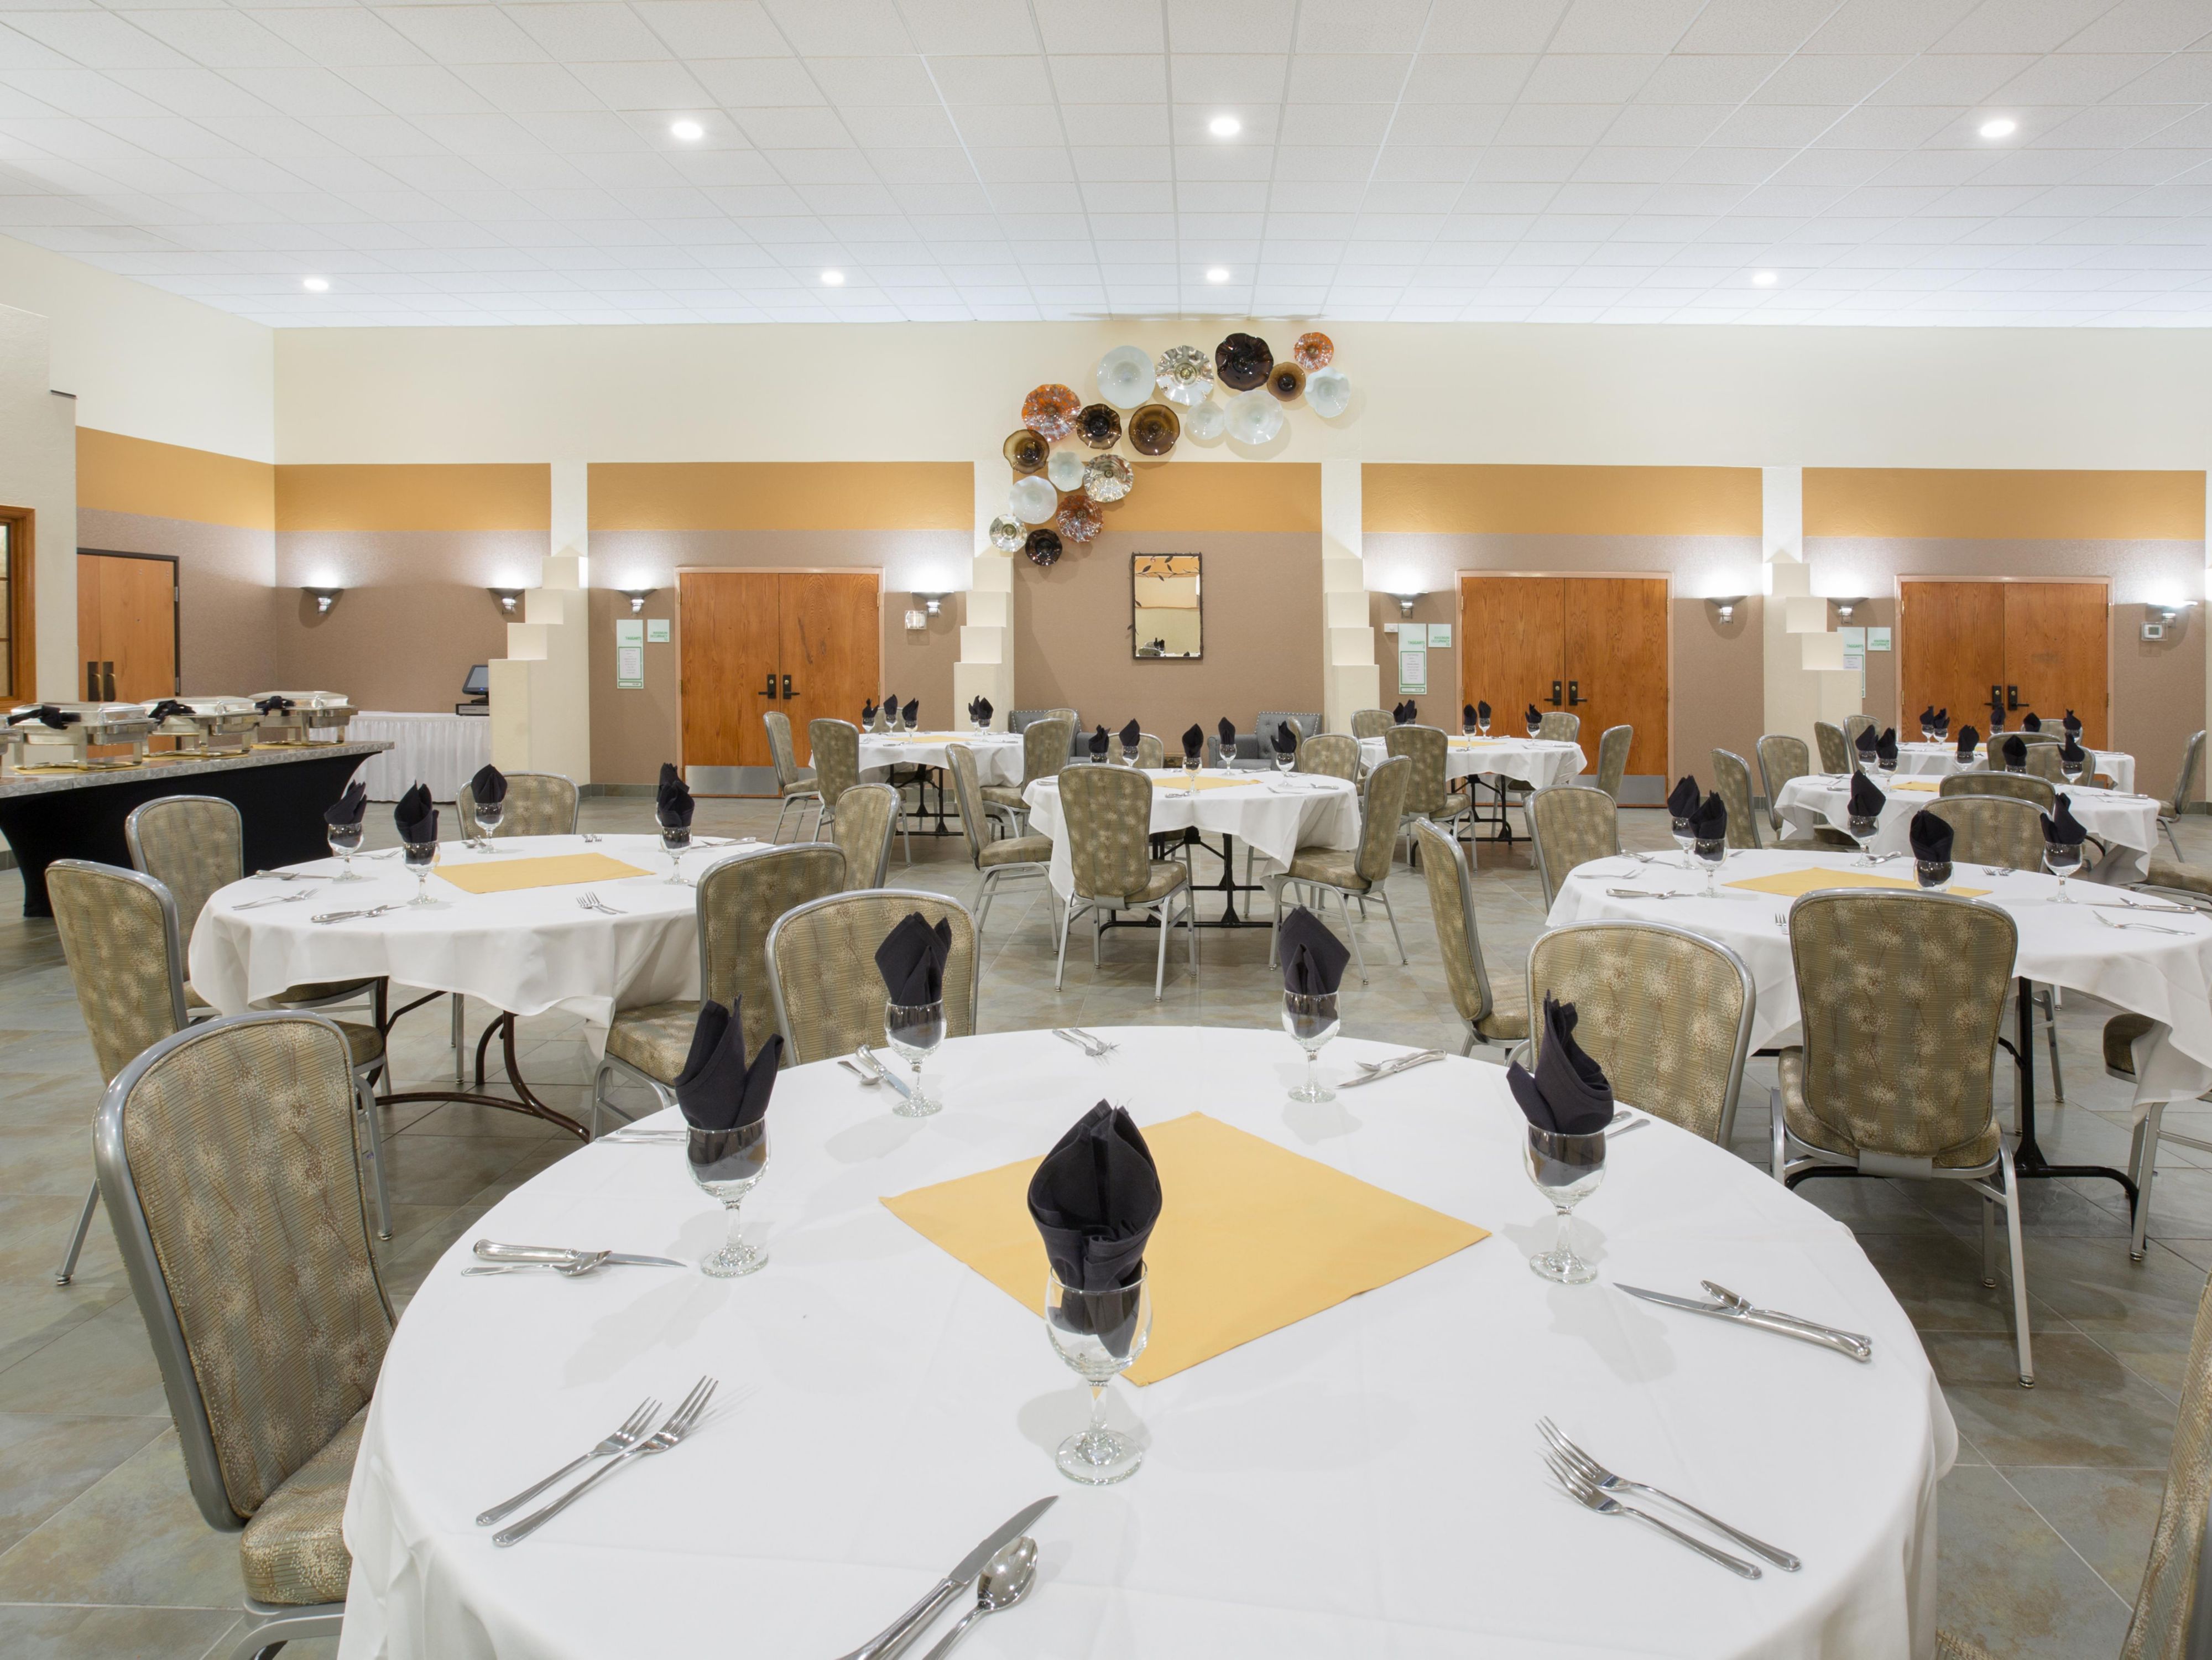 We have 5 different meetings spaces available for small or large events. Corporate meetings, luncheons, birthday party, conference or weddings. A variety of food and beverage offered for your event. Call our Sales Department for more information.